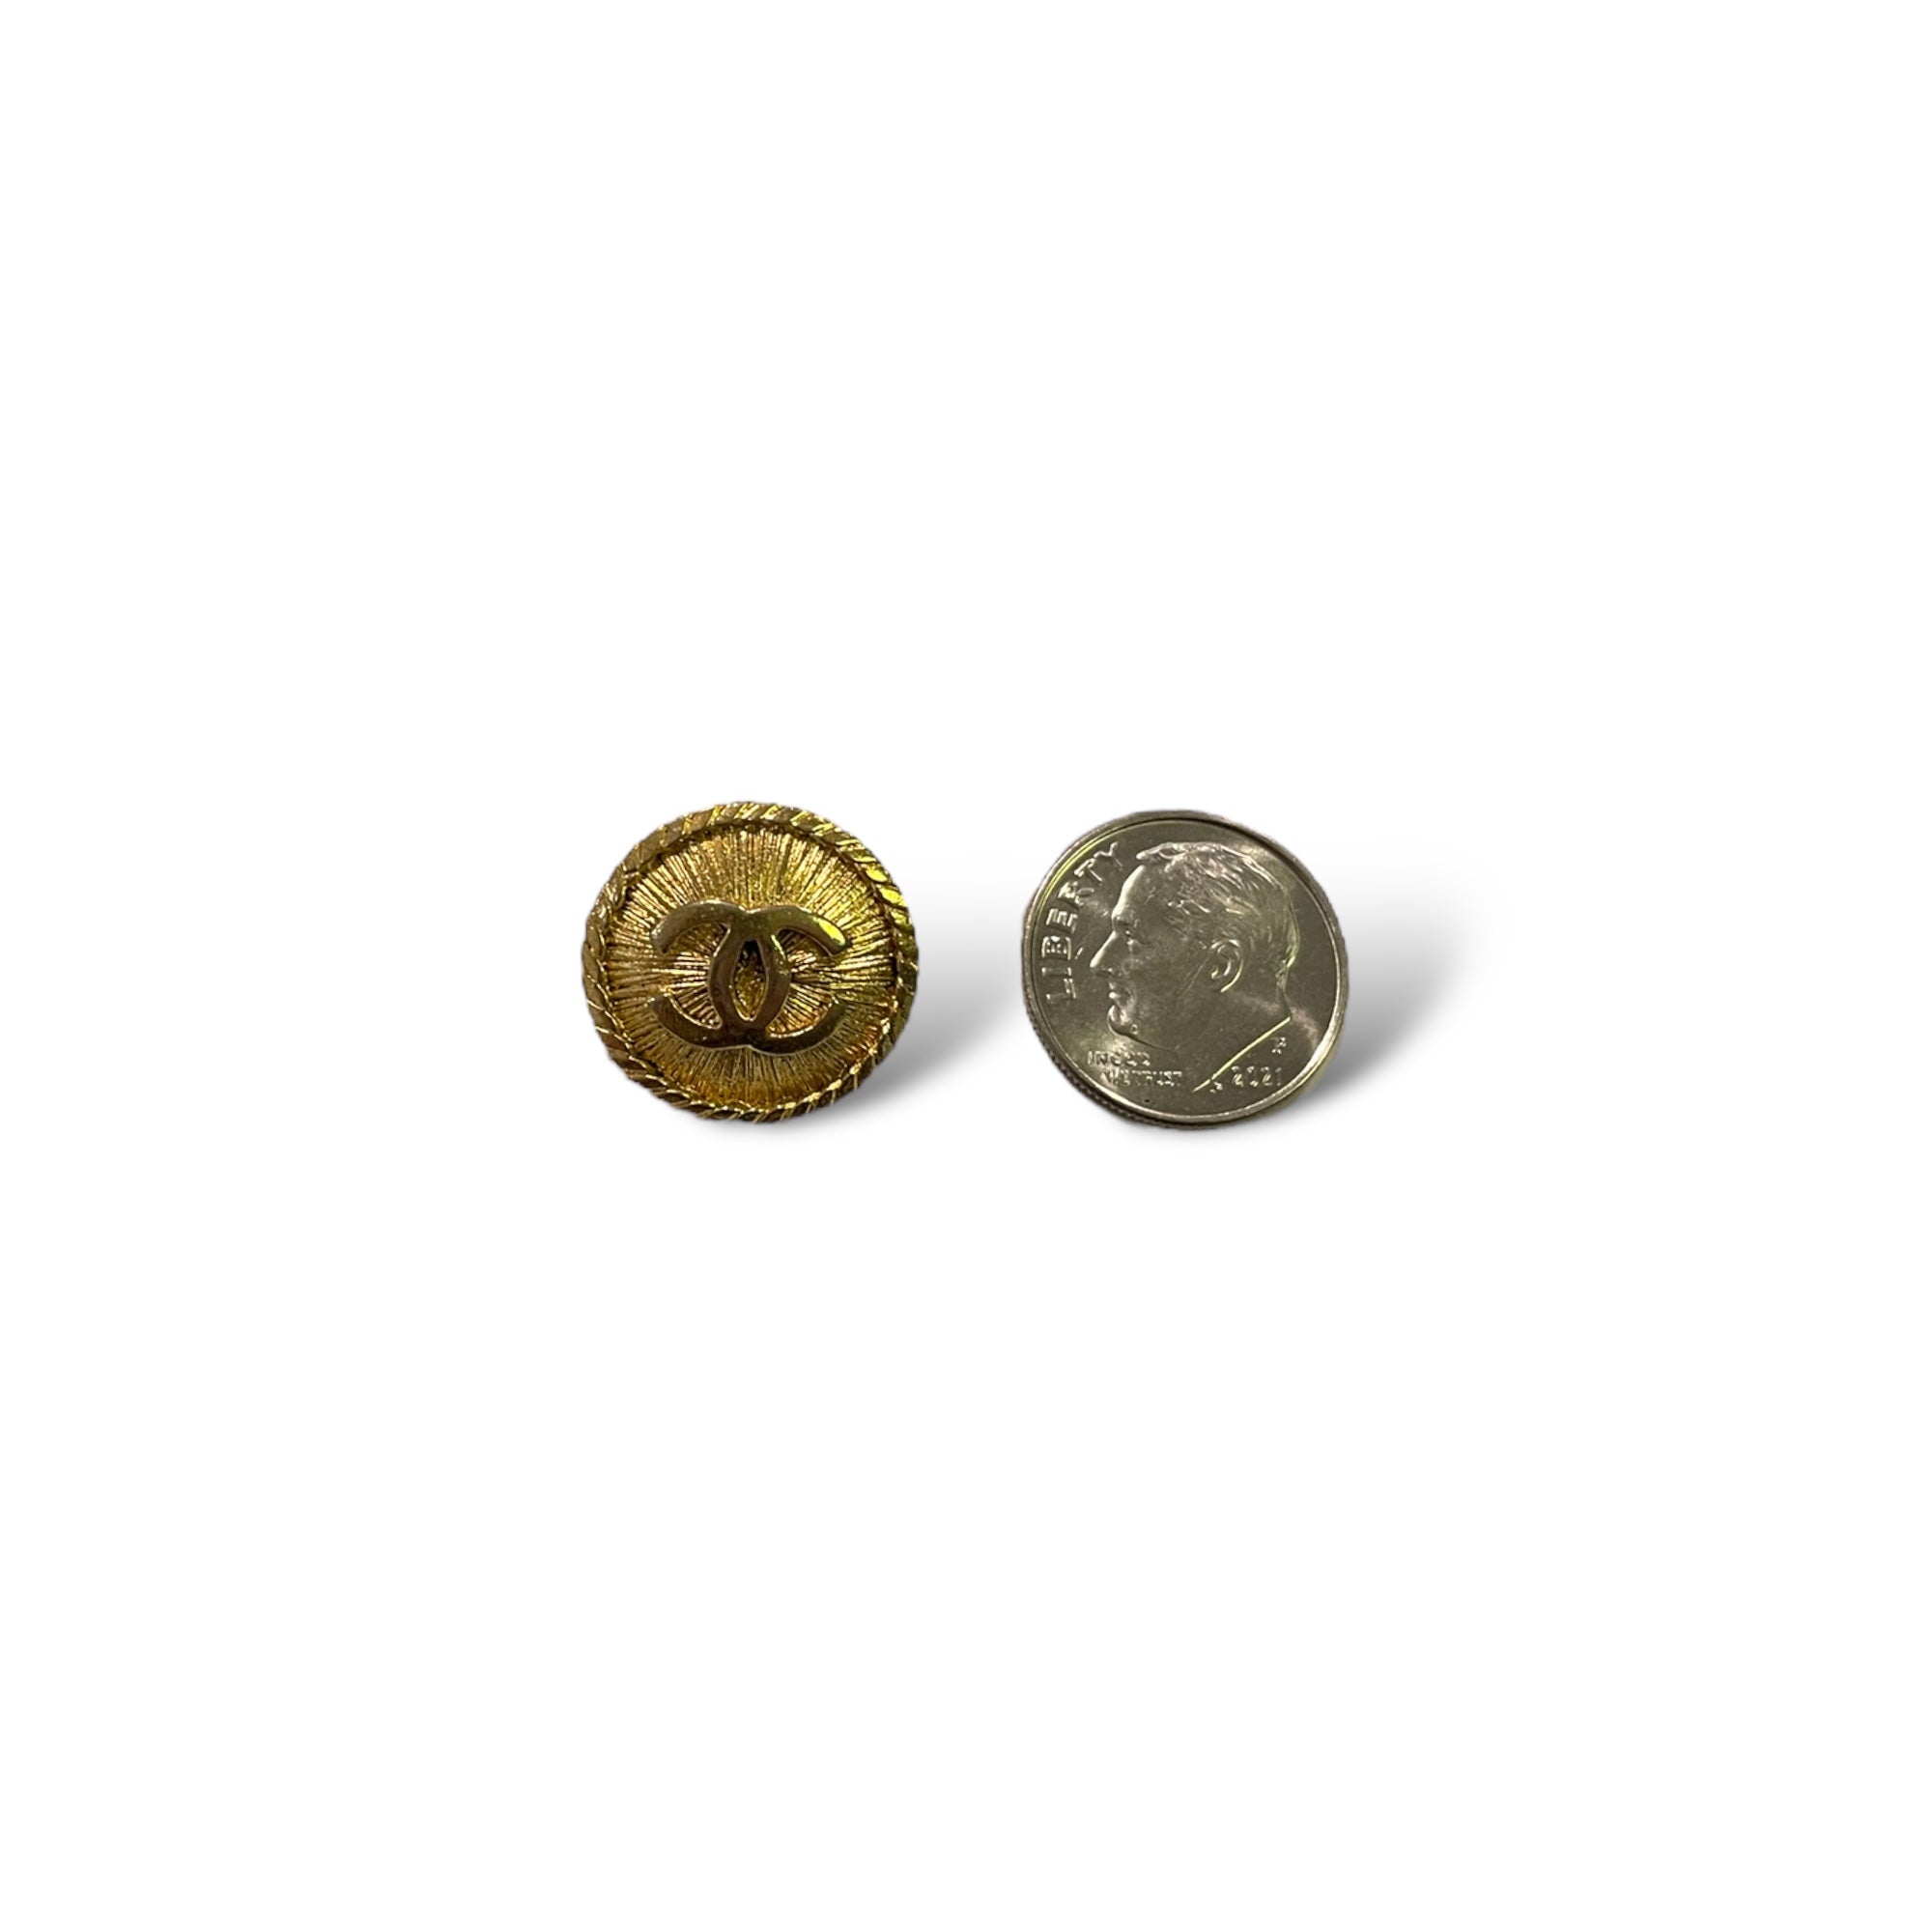 CHANEL Vintage Small Gold Metal CC Interlocking Logo Buttons (Two)